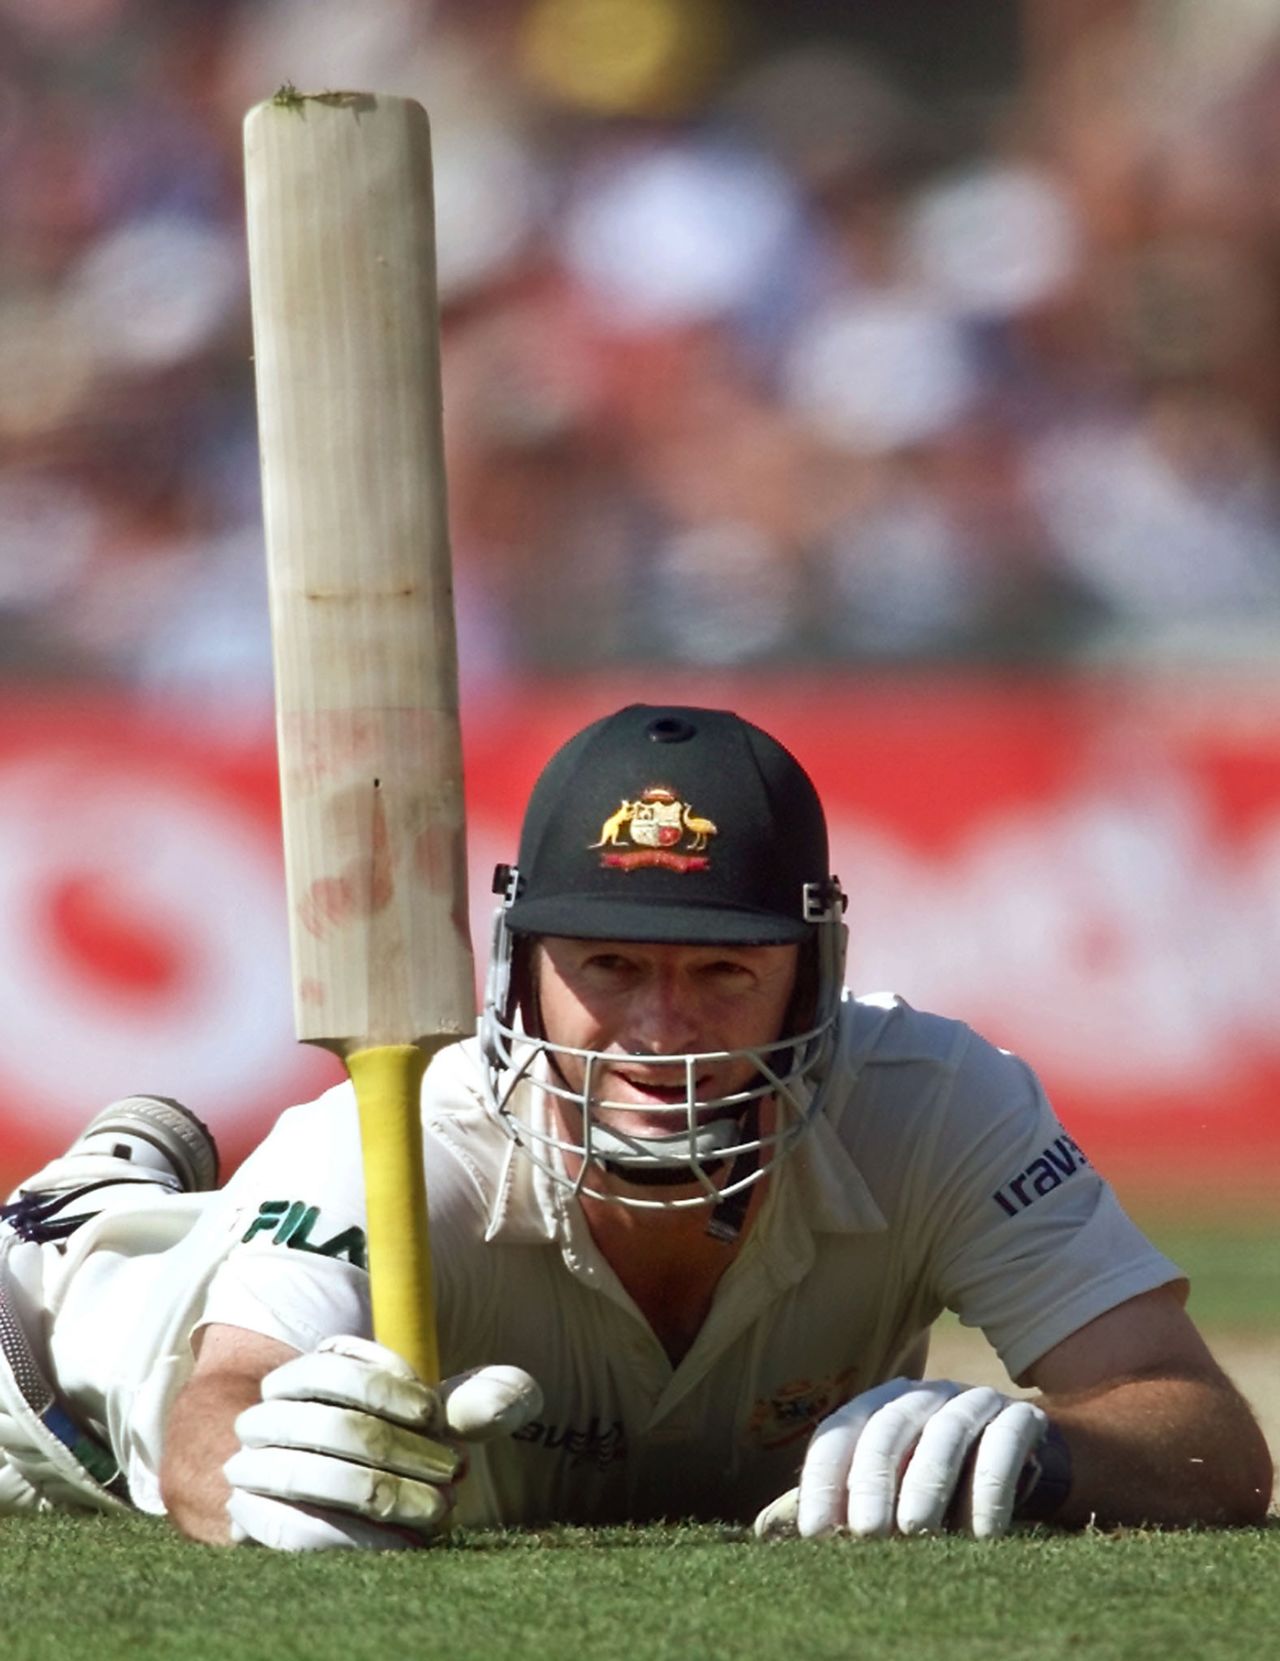 Steve Waugh reaches his hundred, England v Australia, 5th Test, The Oval, 3rd day, August 25, 2001